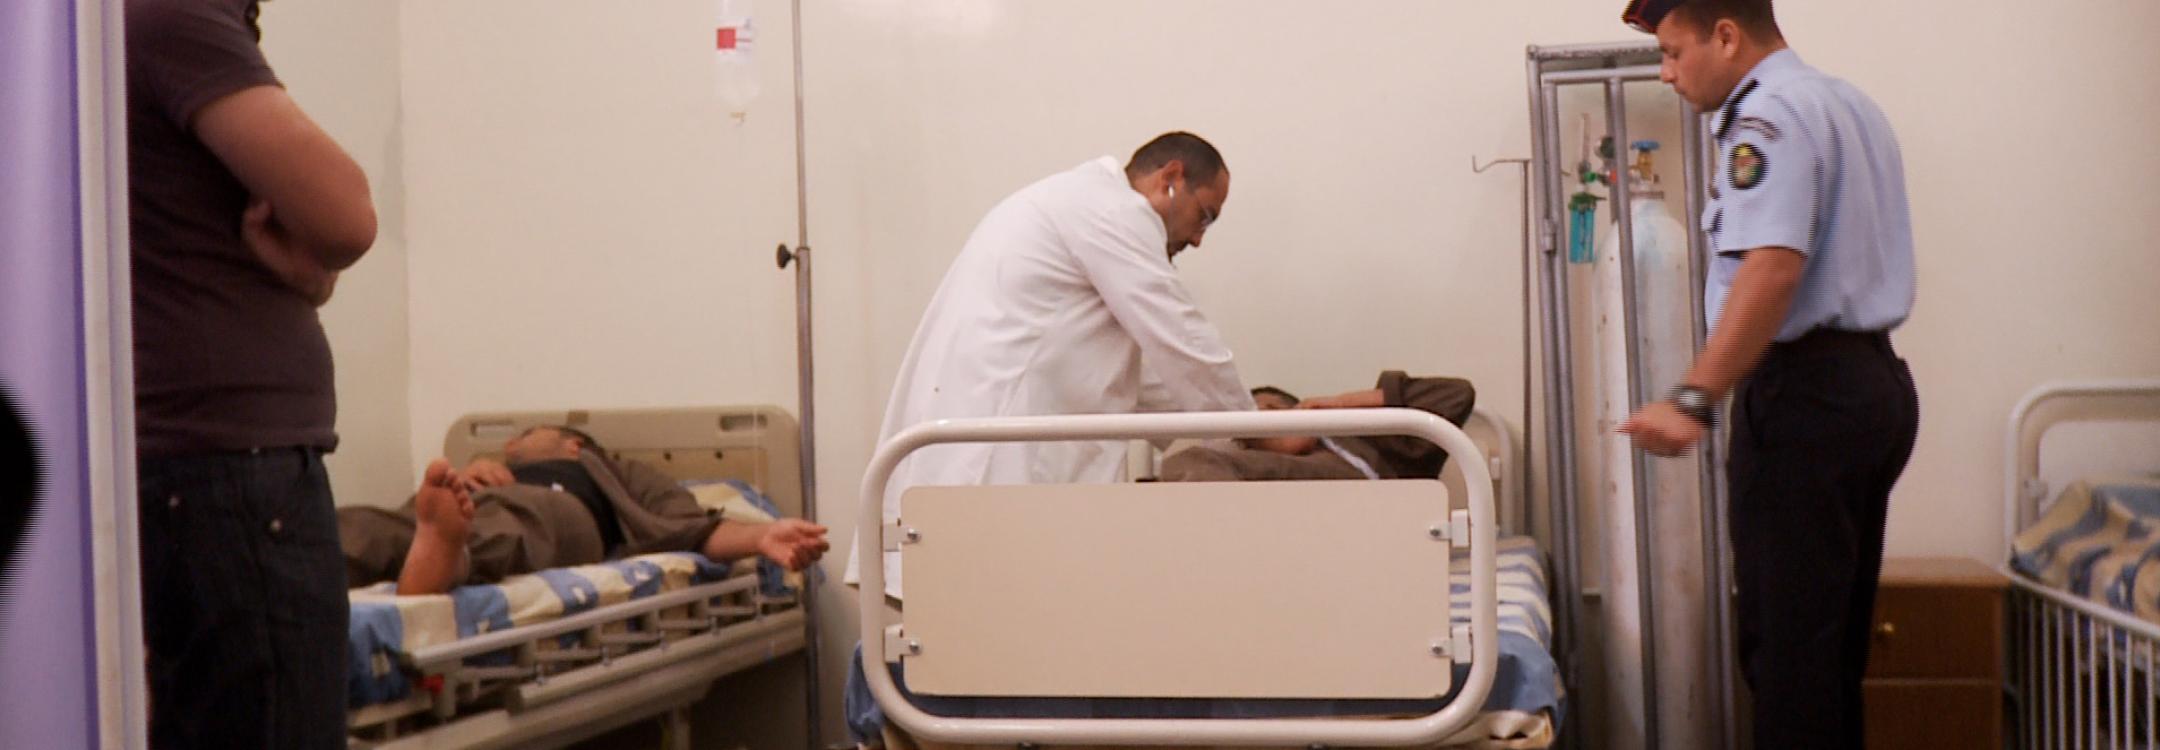 A detainee is treated by a doctor